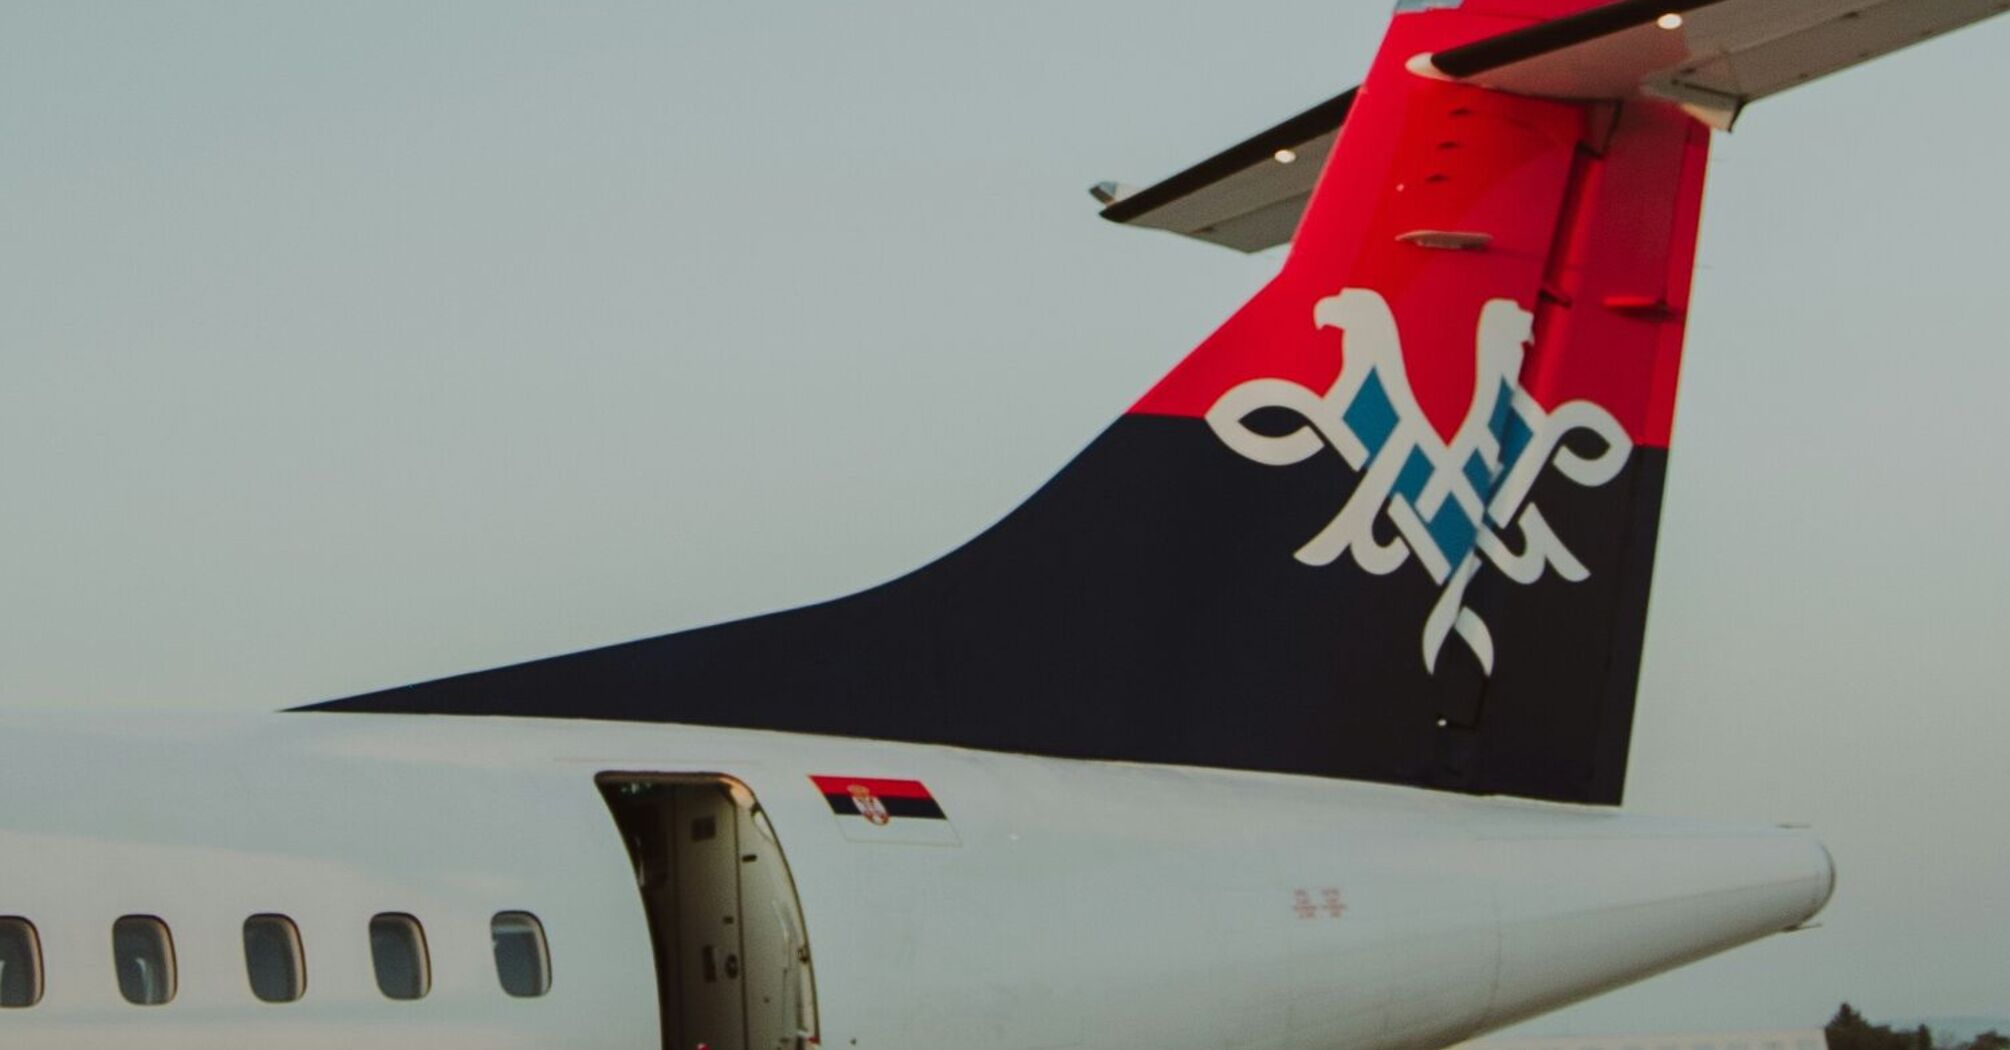 Airserbia's plane tale